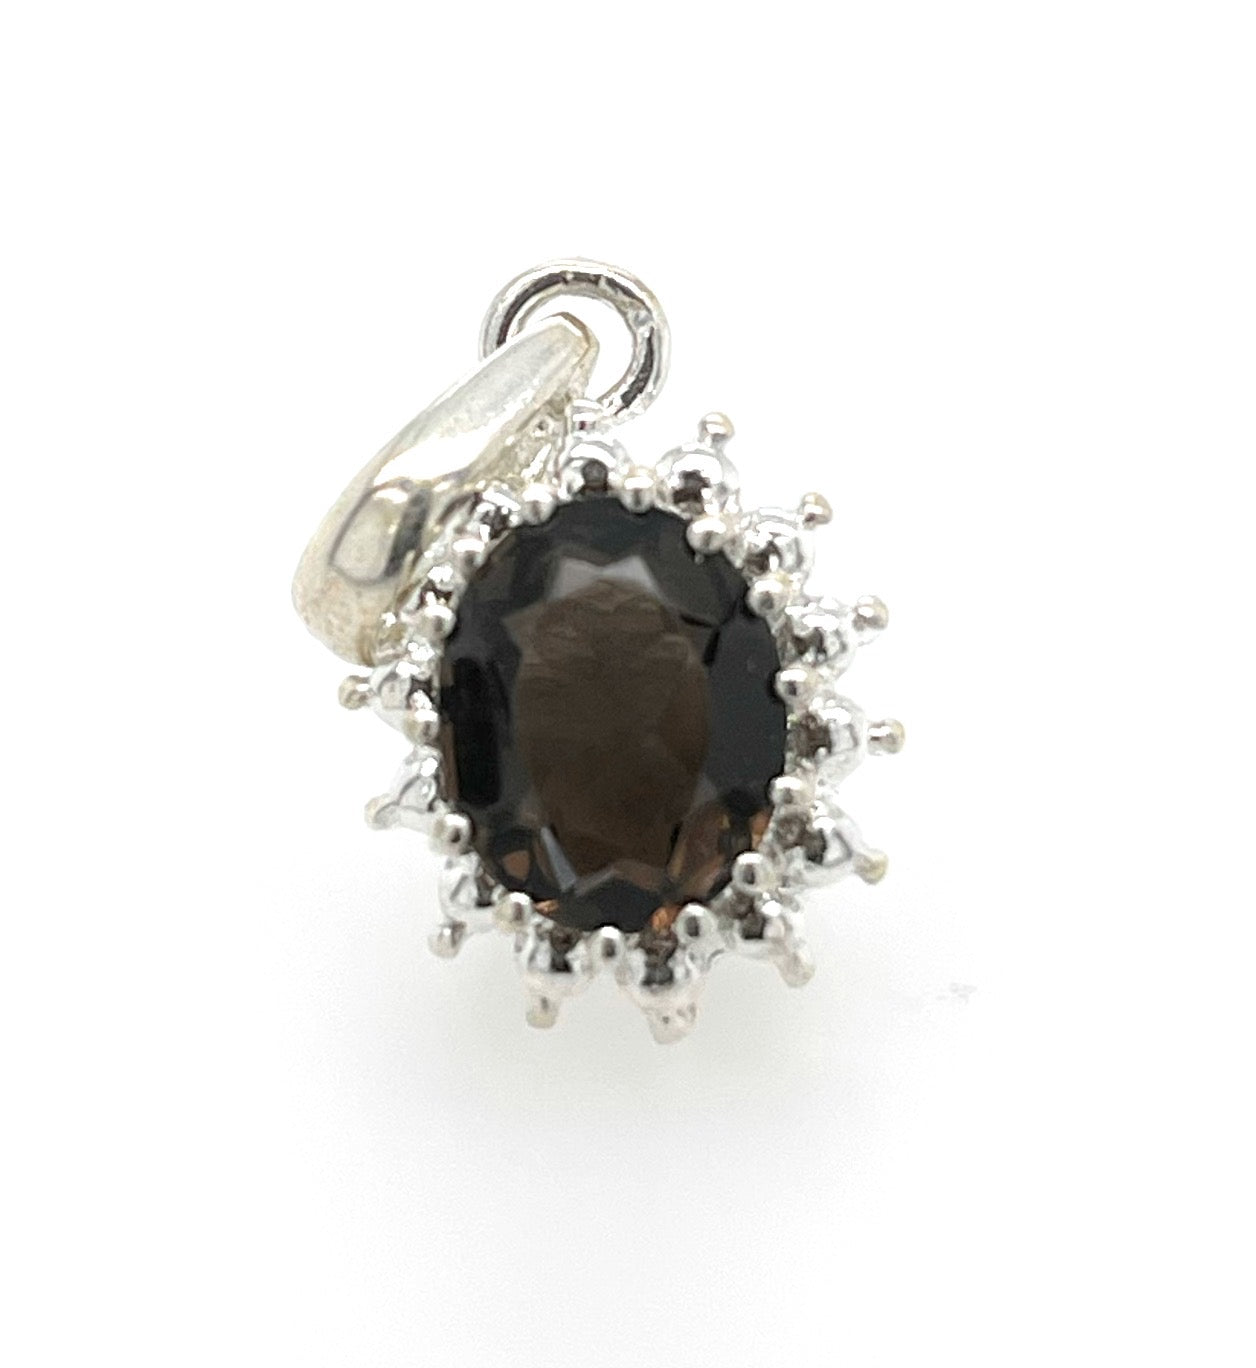 Genuine 4ct Smoky Topaz 925 Solid Sterling Silver Pendant 24mm - Natural Rocks by Kala